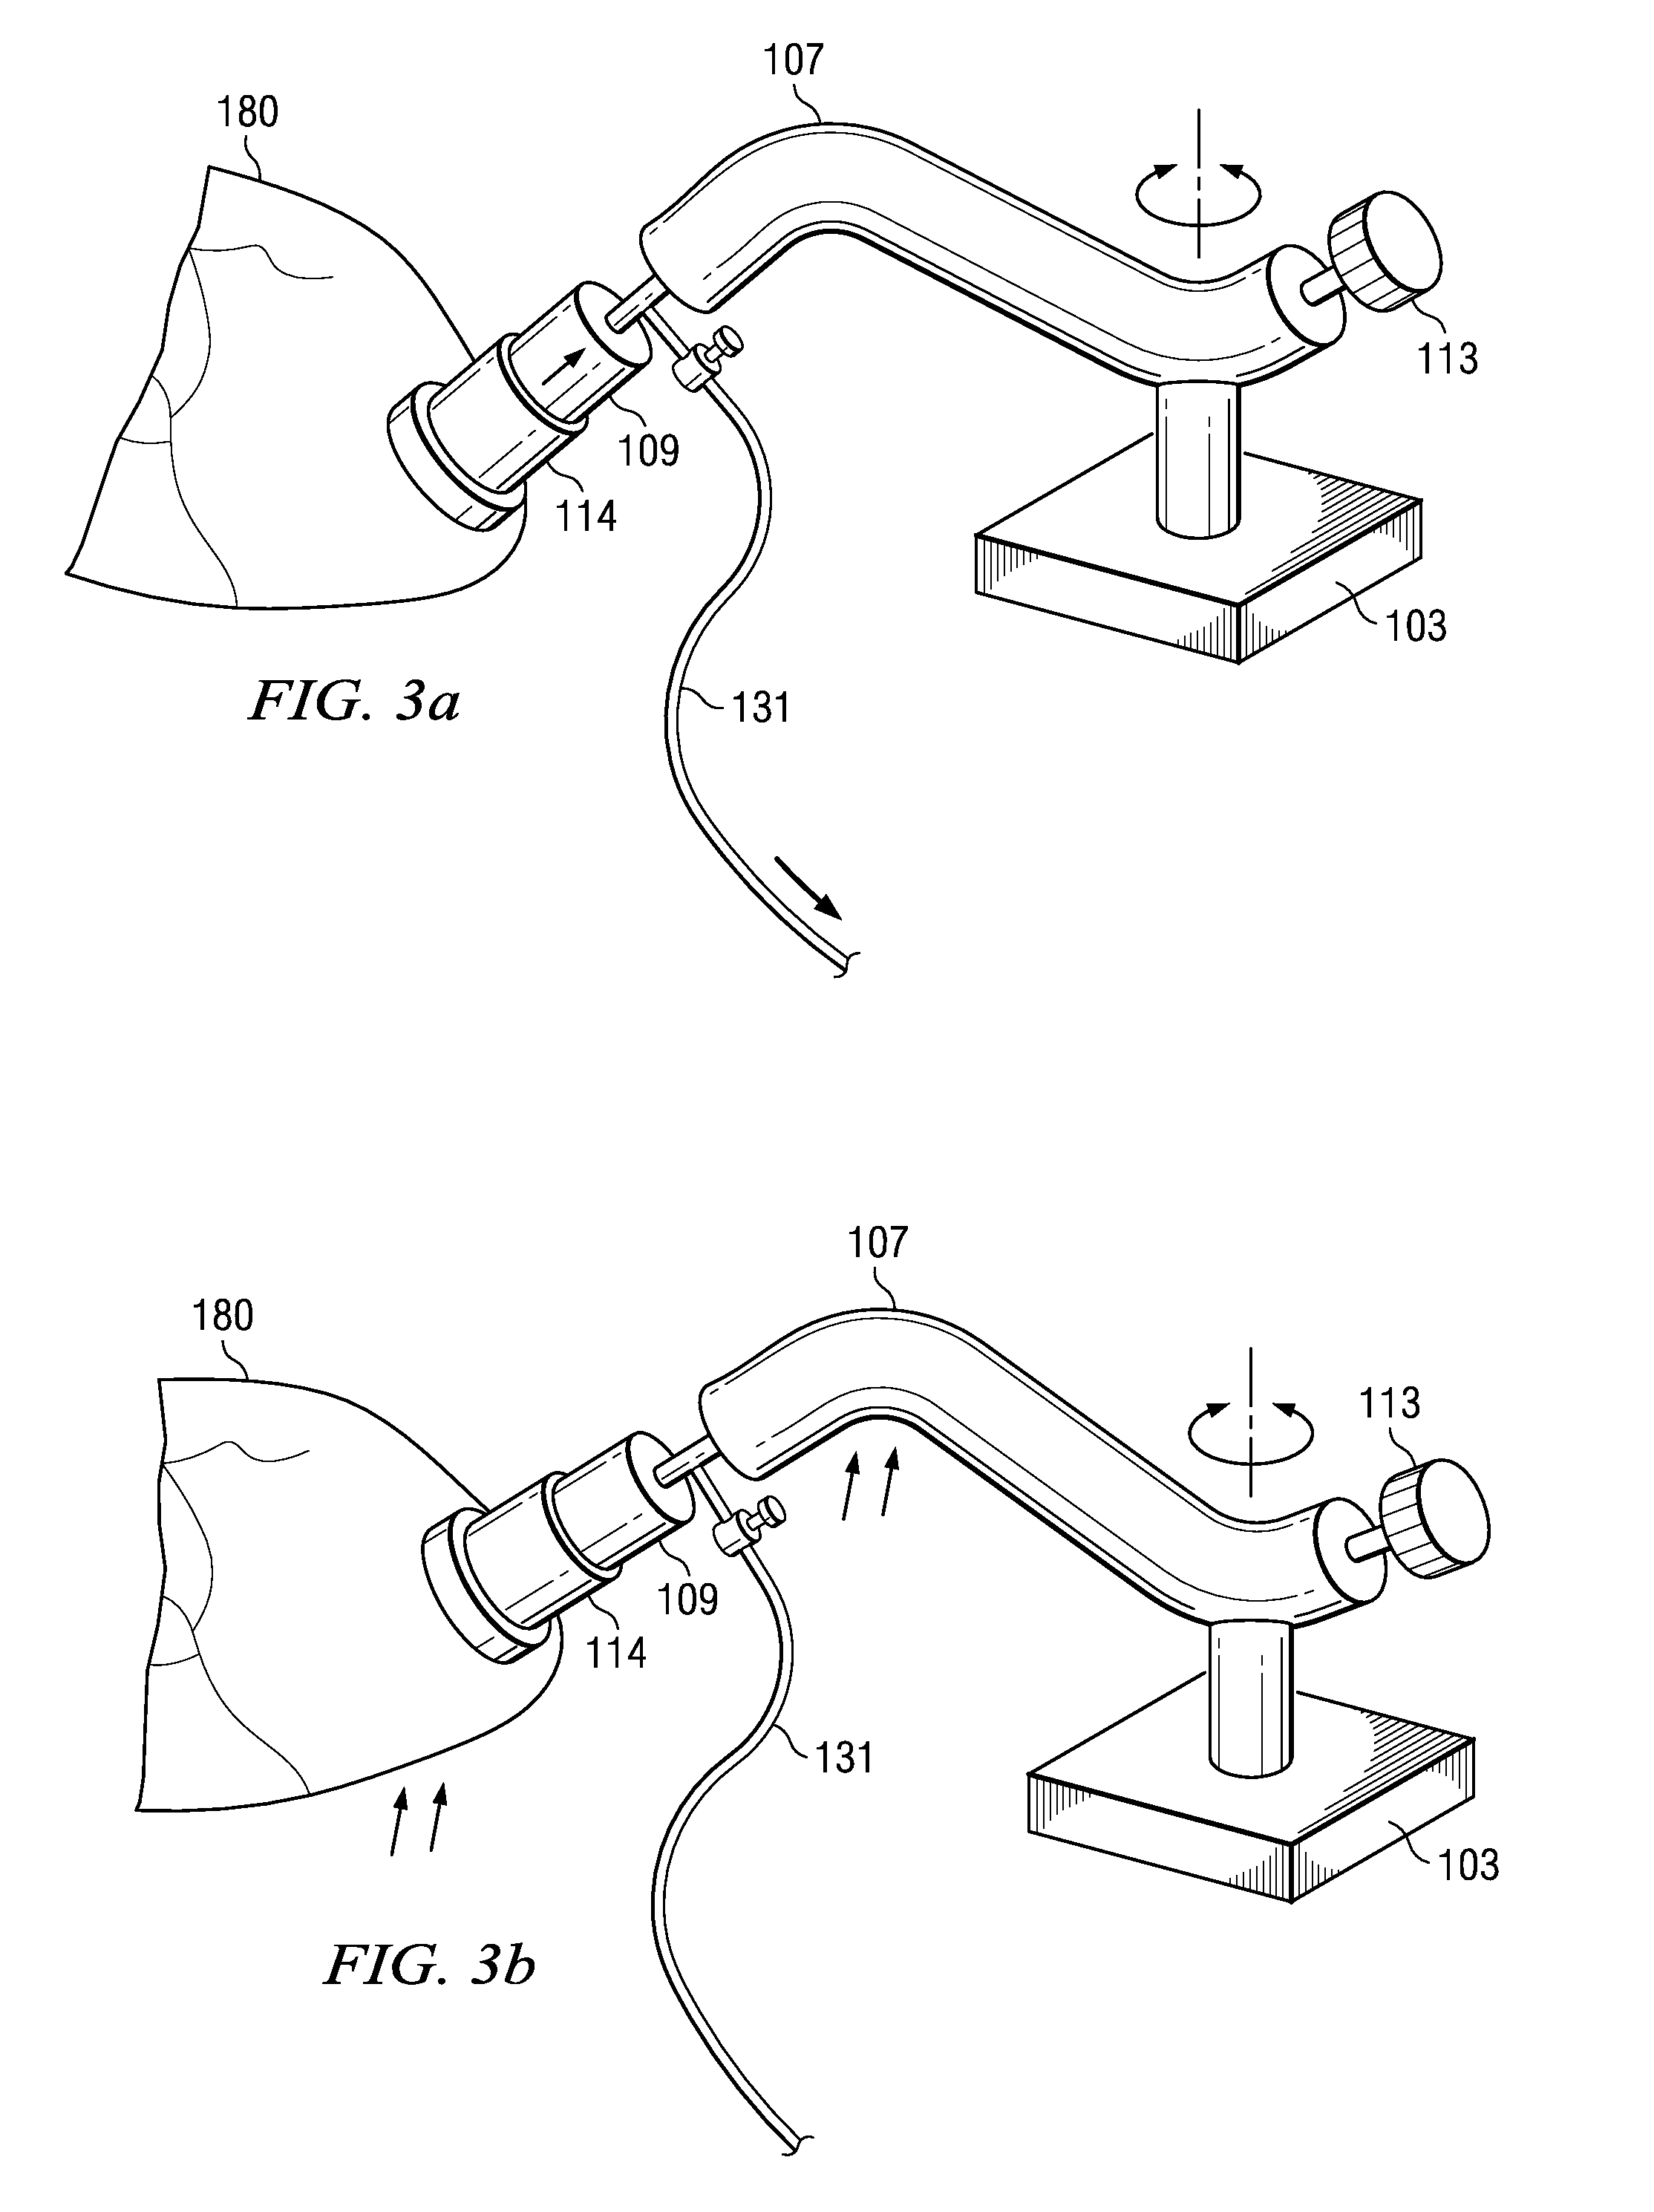 Method and apparatus for stabilization and positioning during surgery